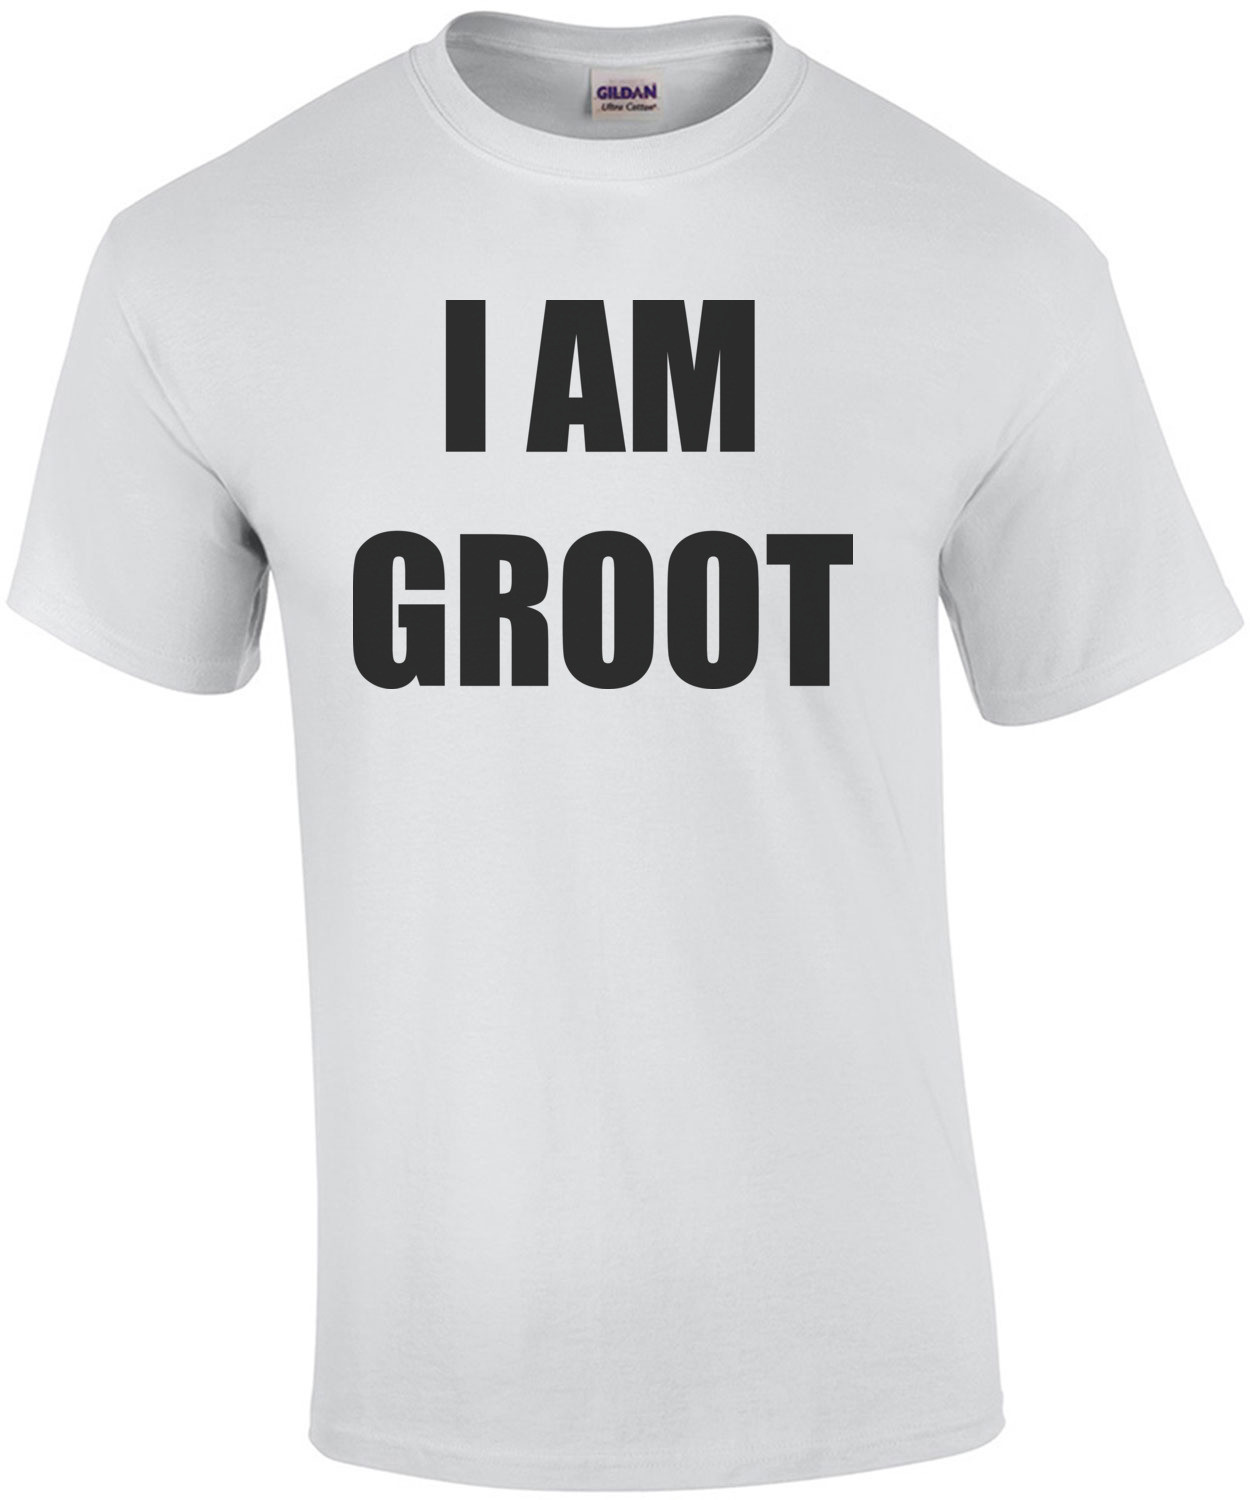 I AM GROOT - Groot Guardians Of The Galaxy Shirt